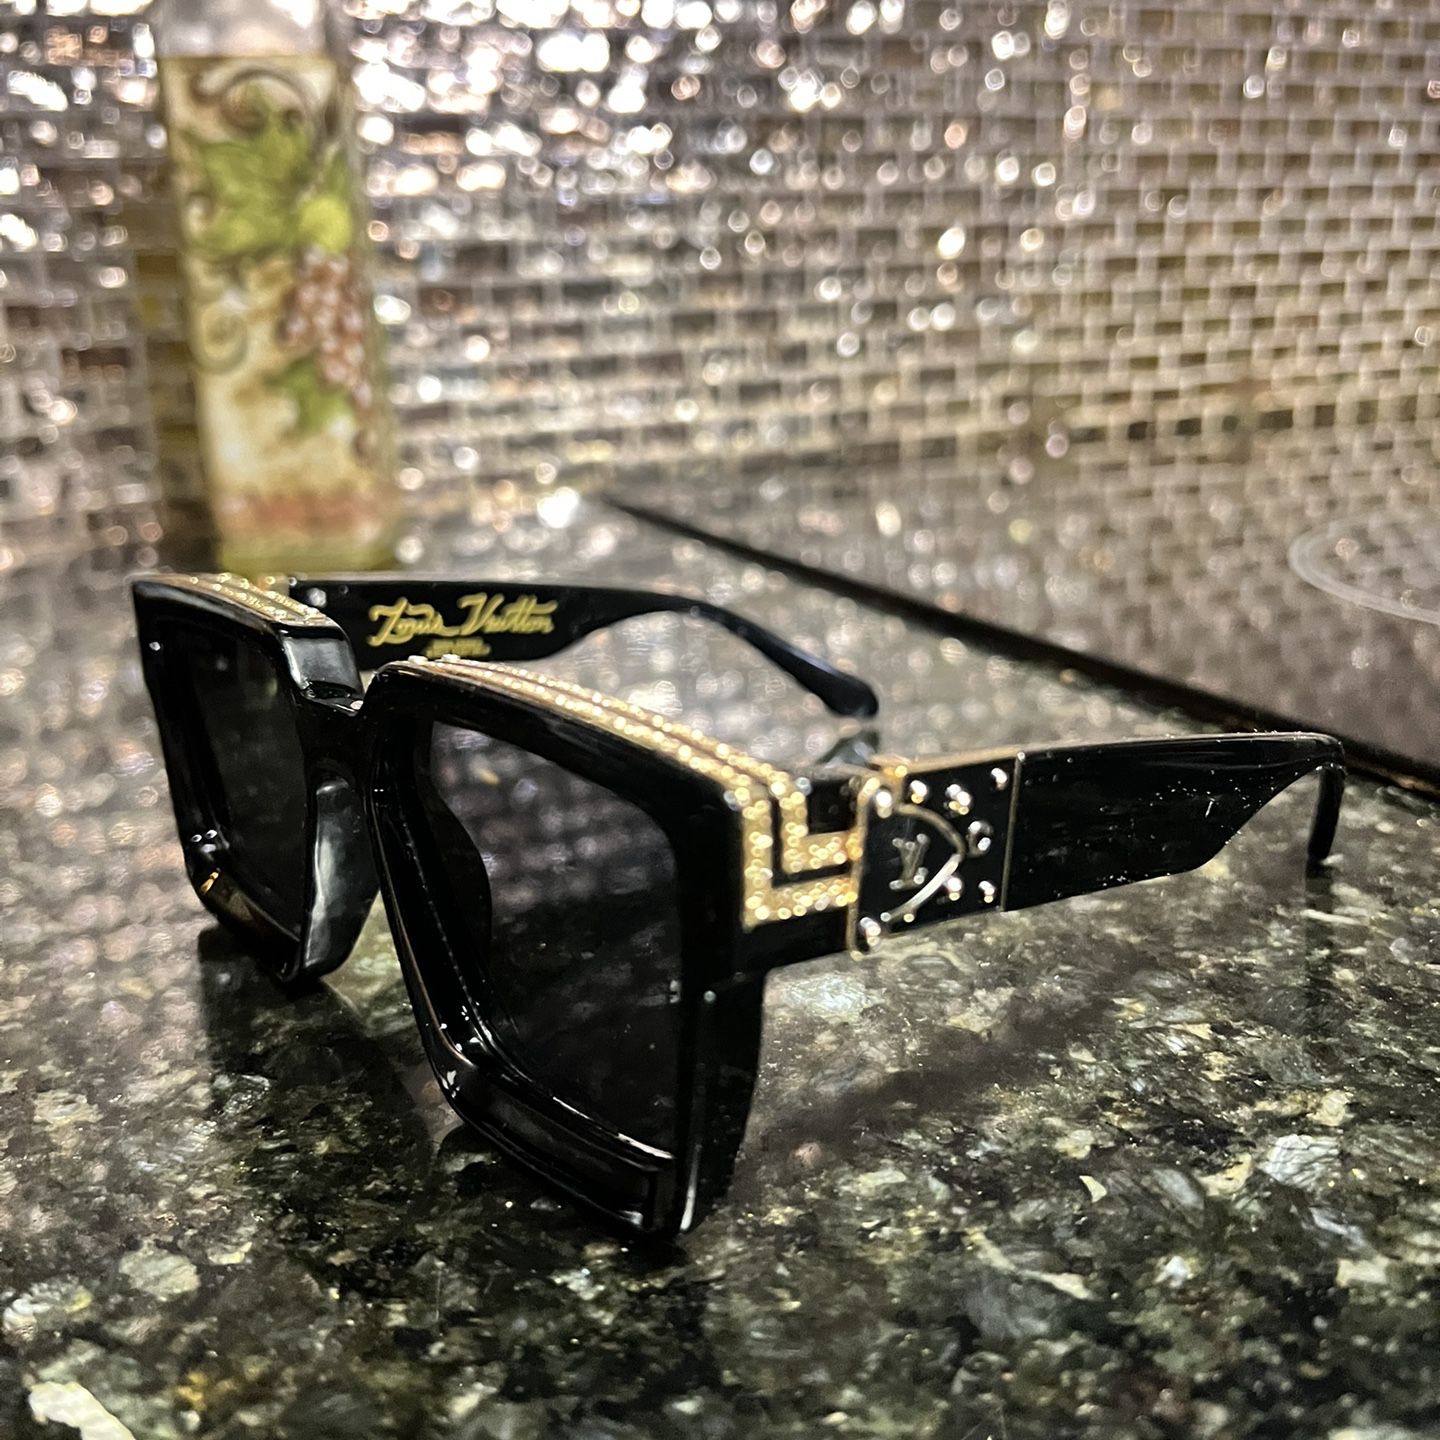 Louis Vuitton in the mood for love sunglasses for Sale in Lodi, NJ - OfferUp